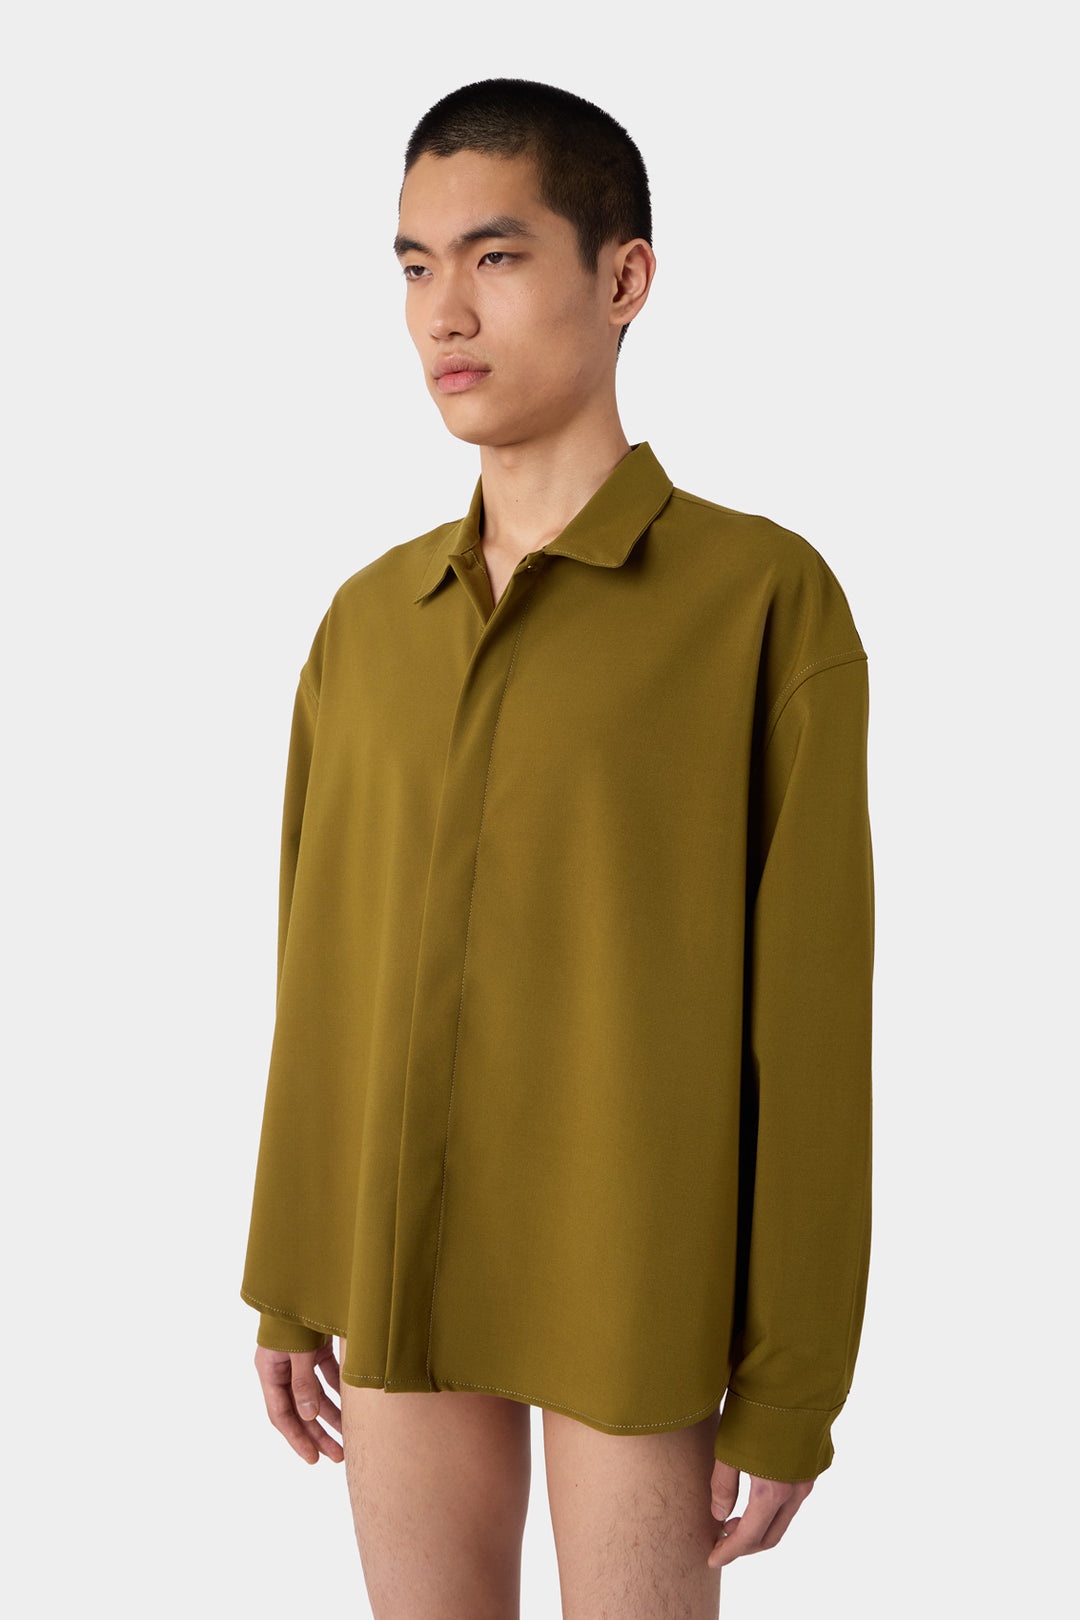 OVER SHIRT / olive green - 1